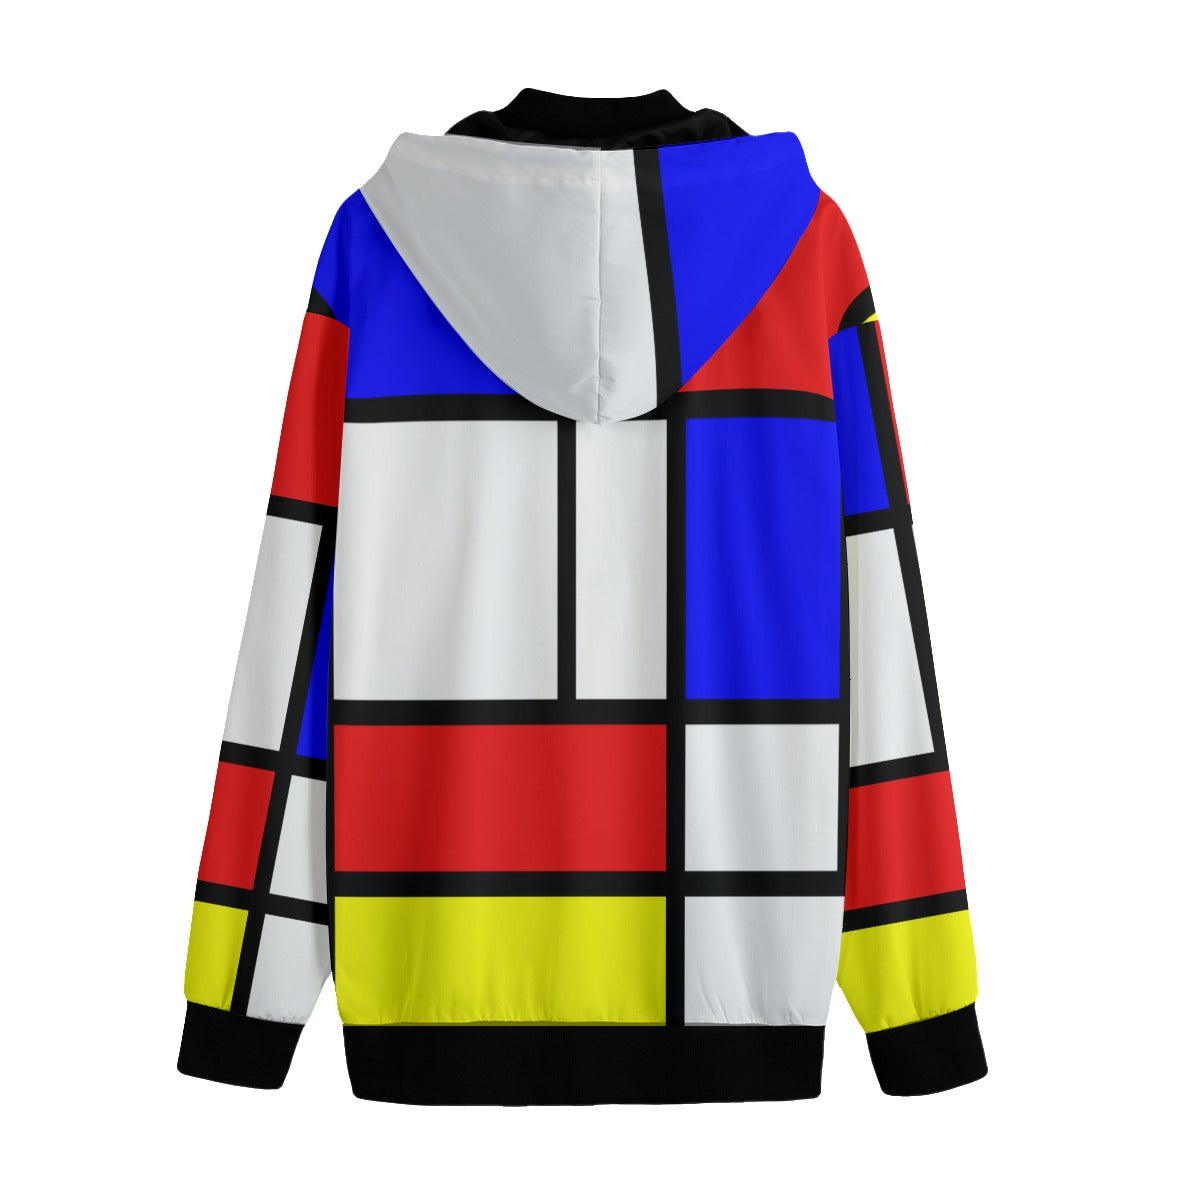 All-Over Print Men's Varsity Jacket with Mondrian design (shipping from China)